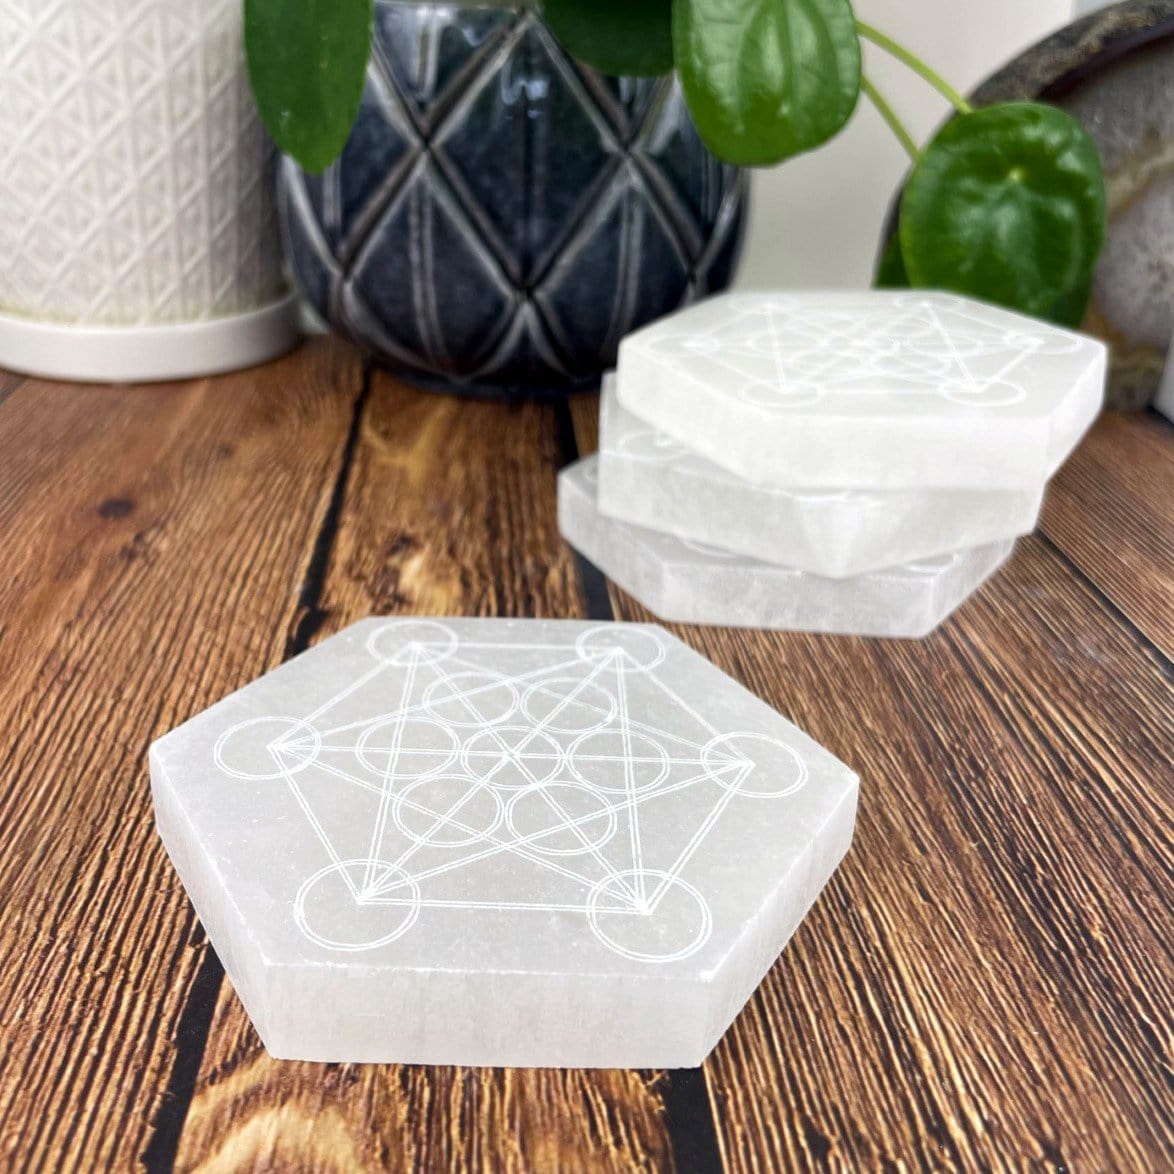 angled view of selenite hexagon engraved with metatron symbol with others in background for thickness